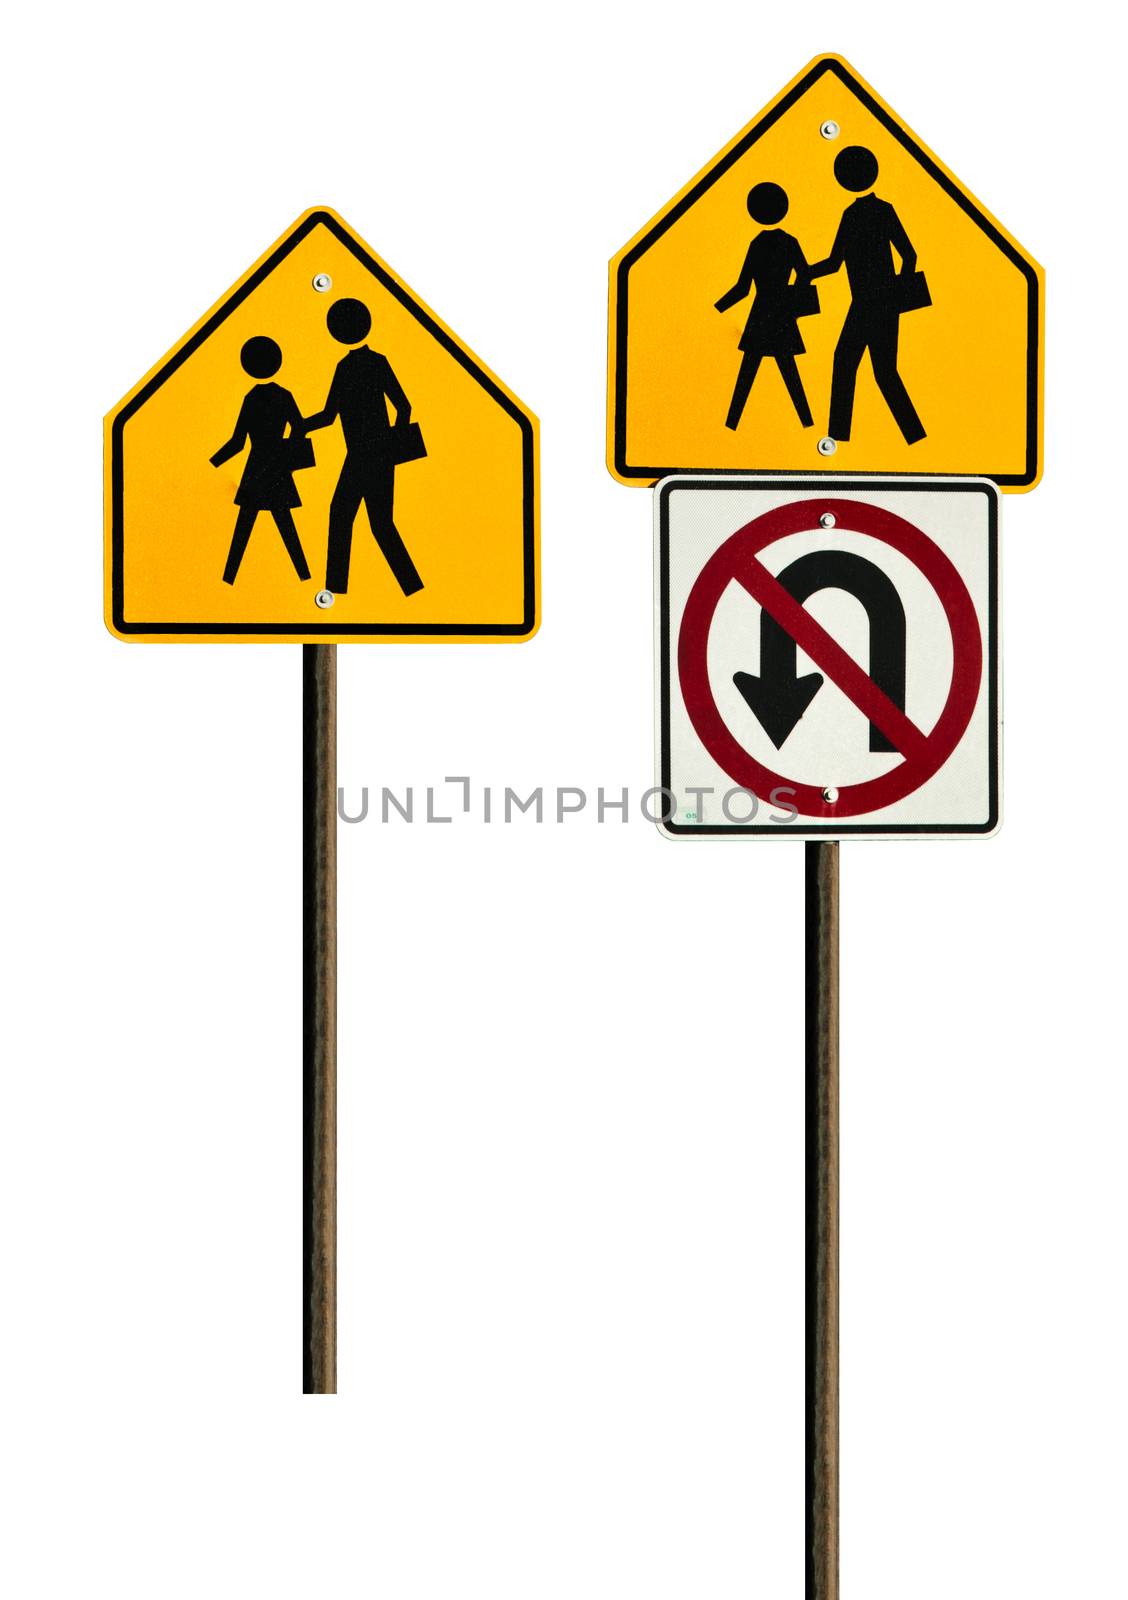 School Zone Signs by rcarner